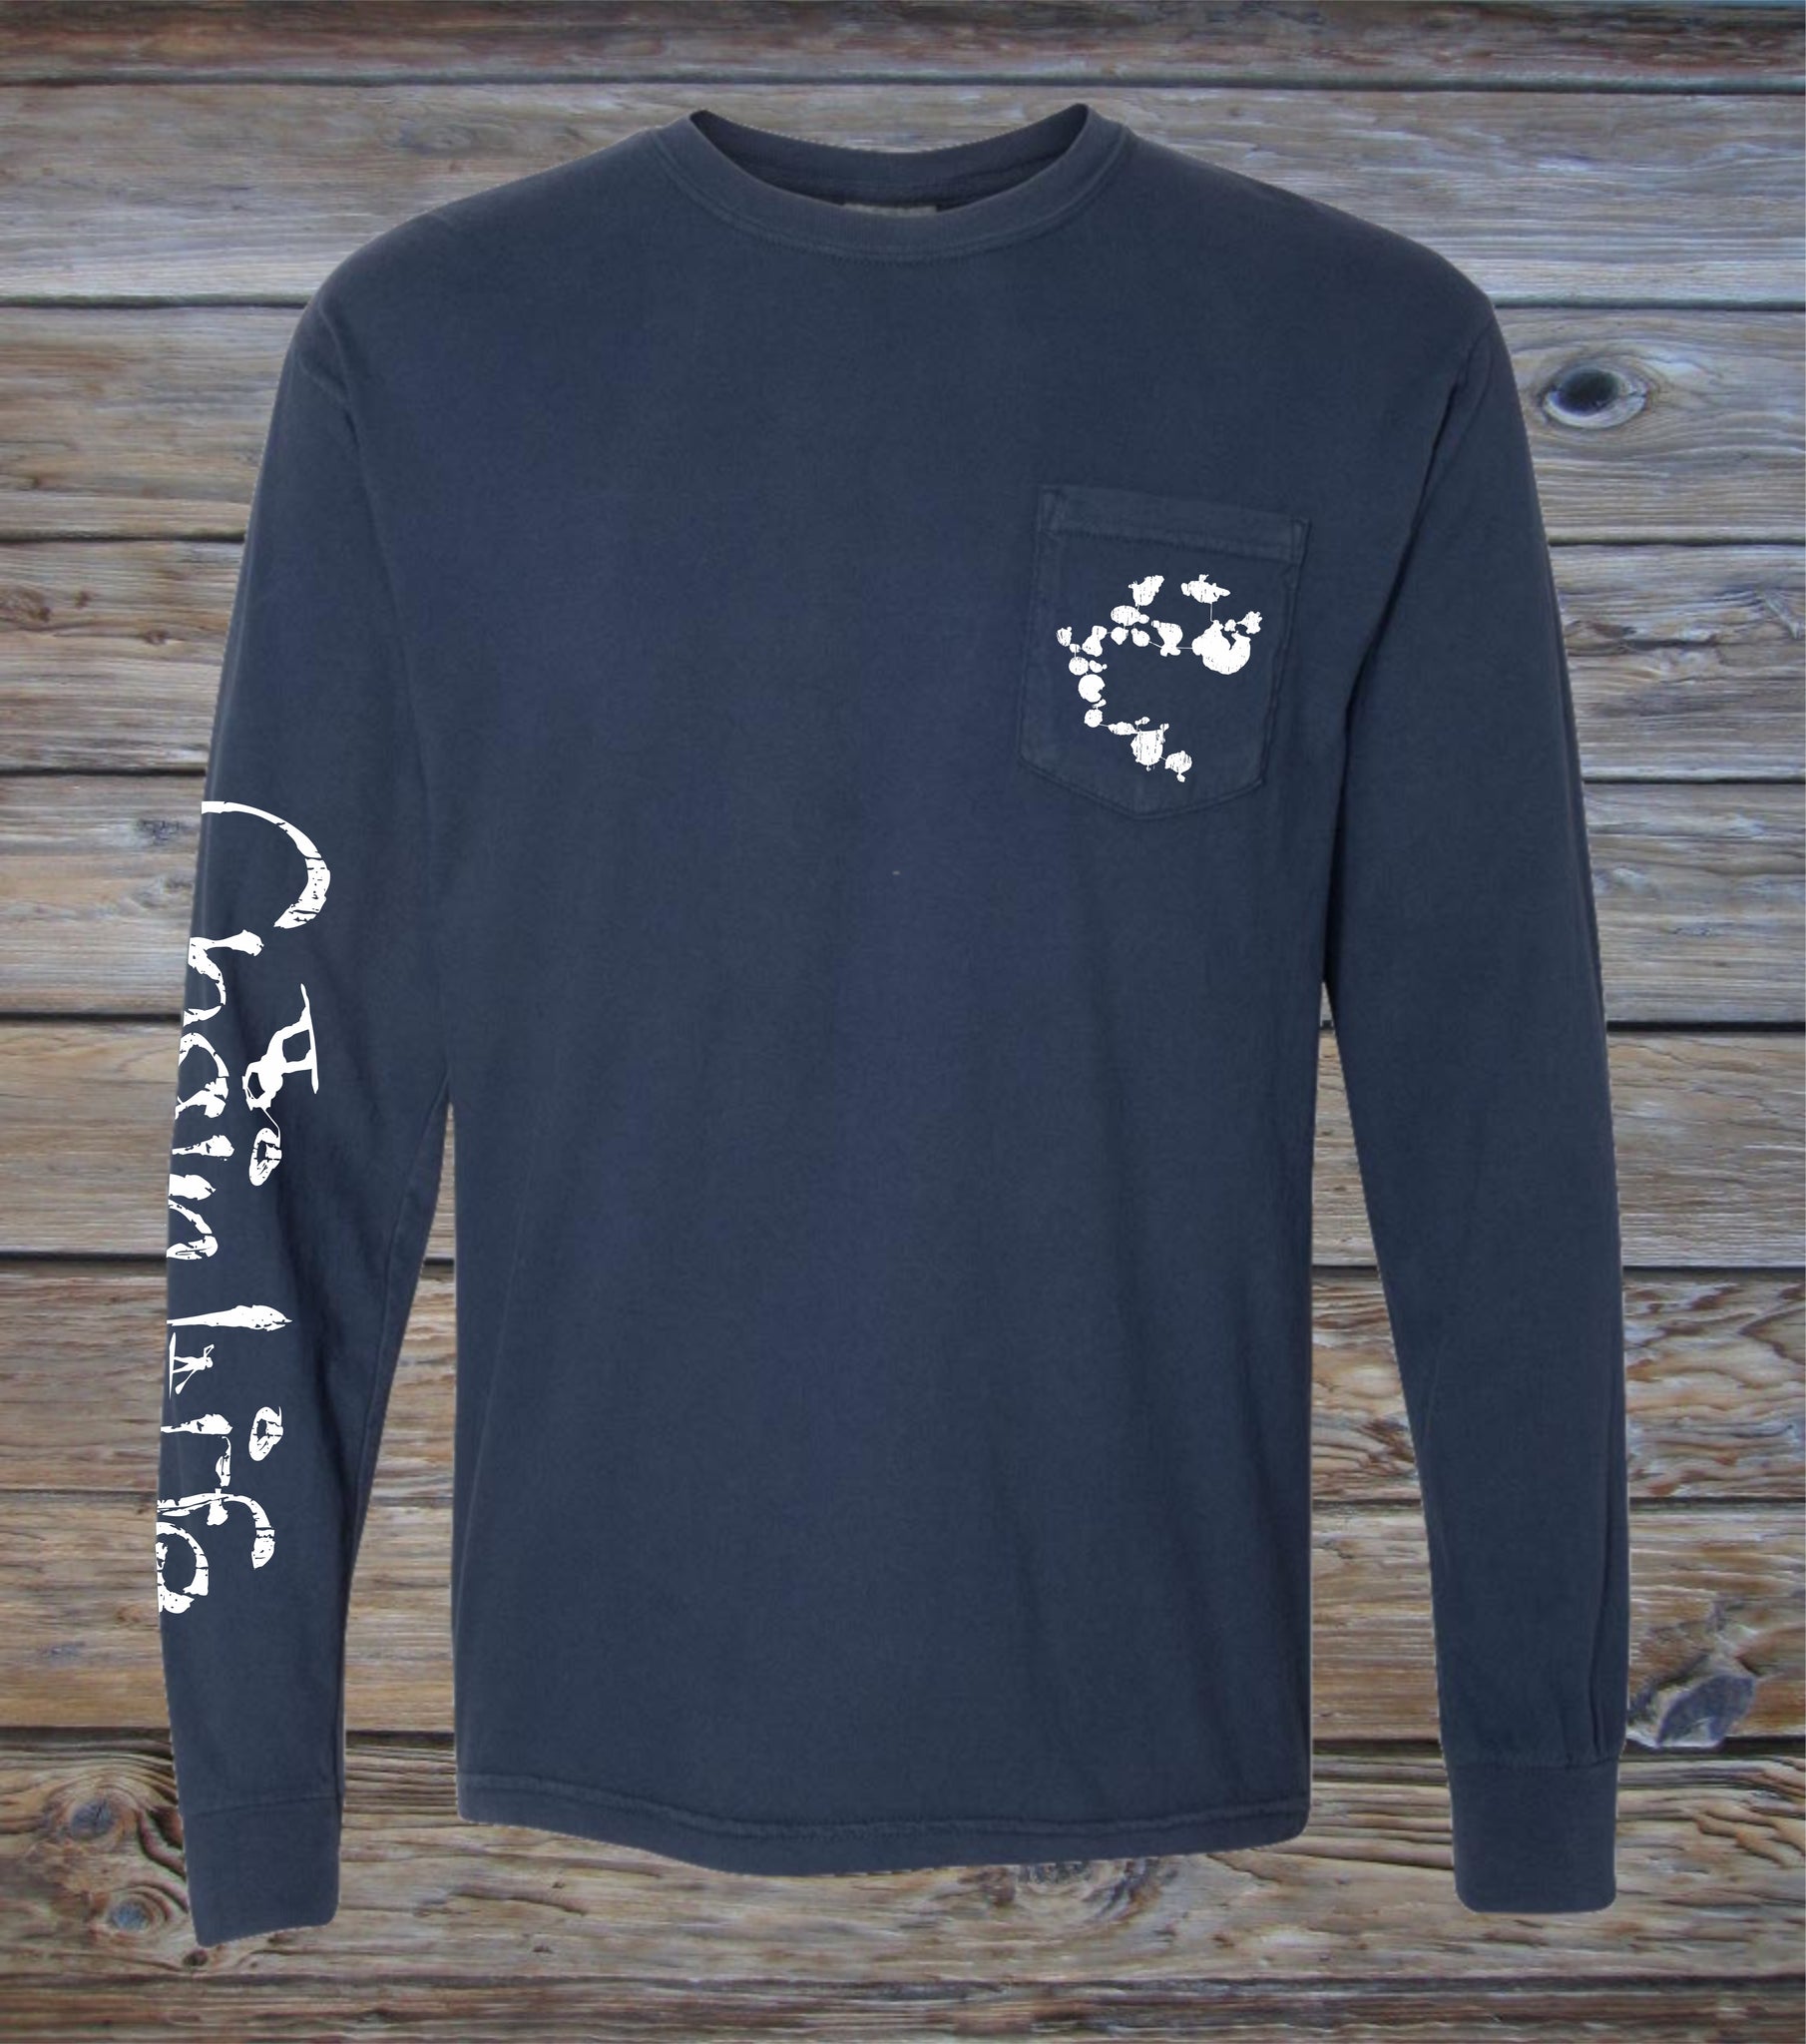 Long Sleeve Pocket Tee with Chain Life Logo & Chain of Lakes Silhouette